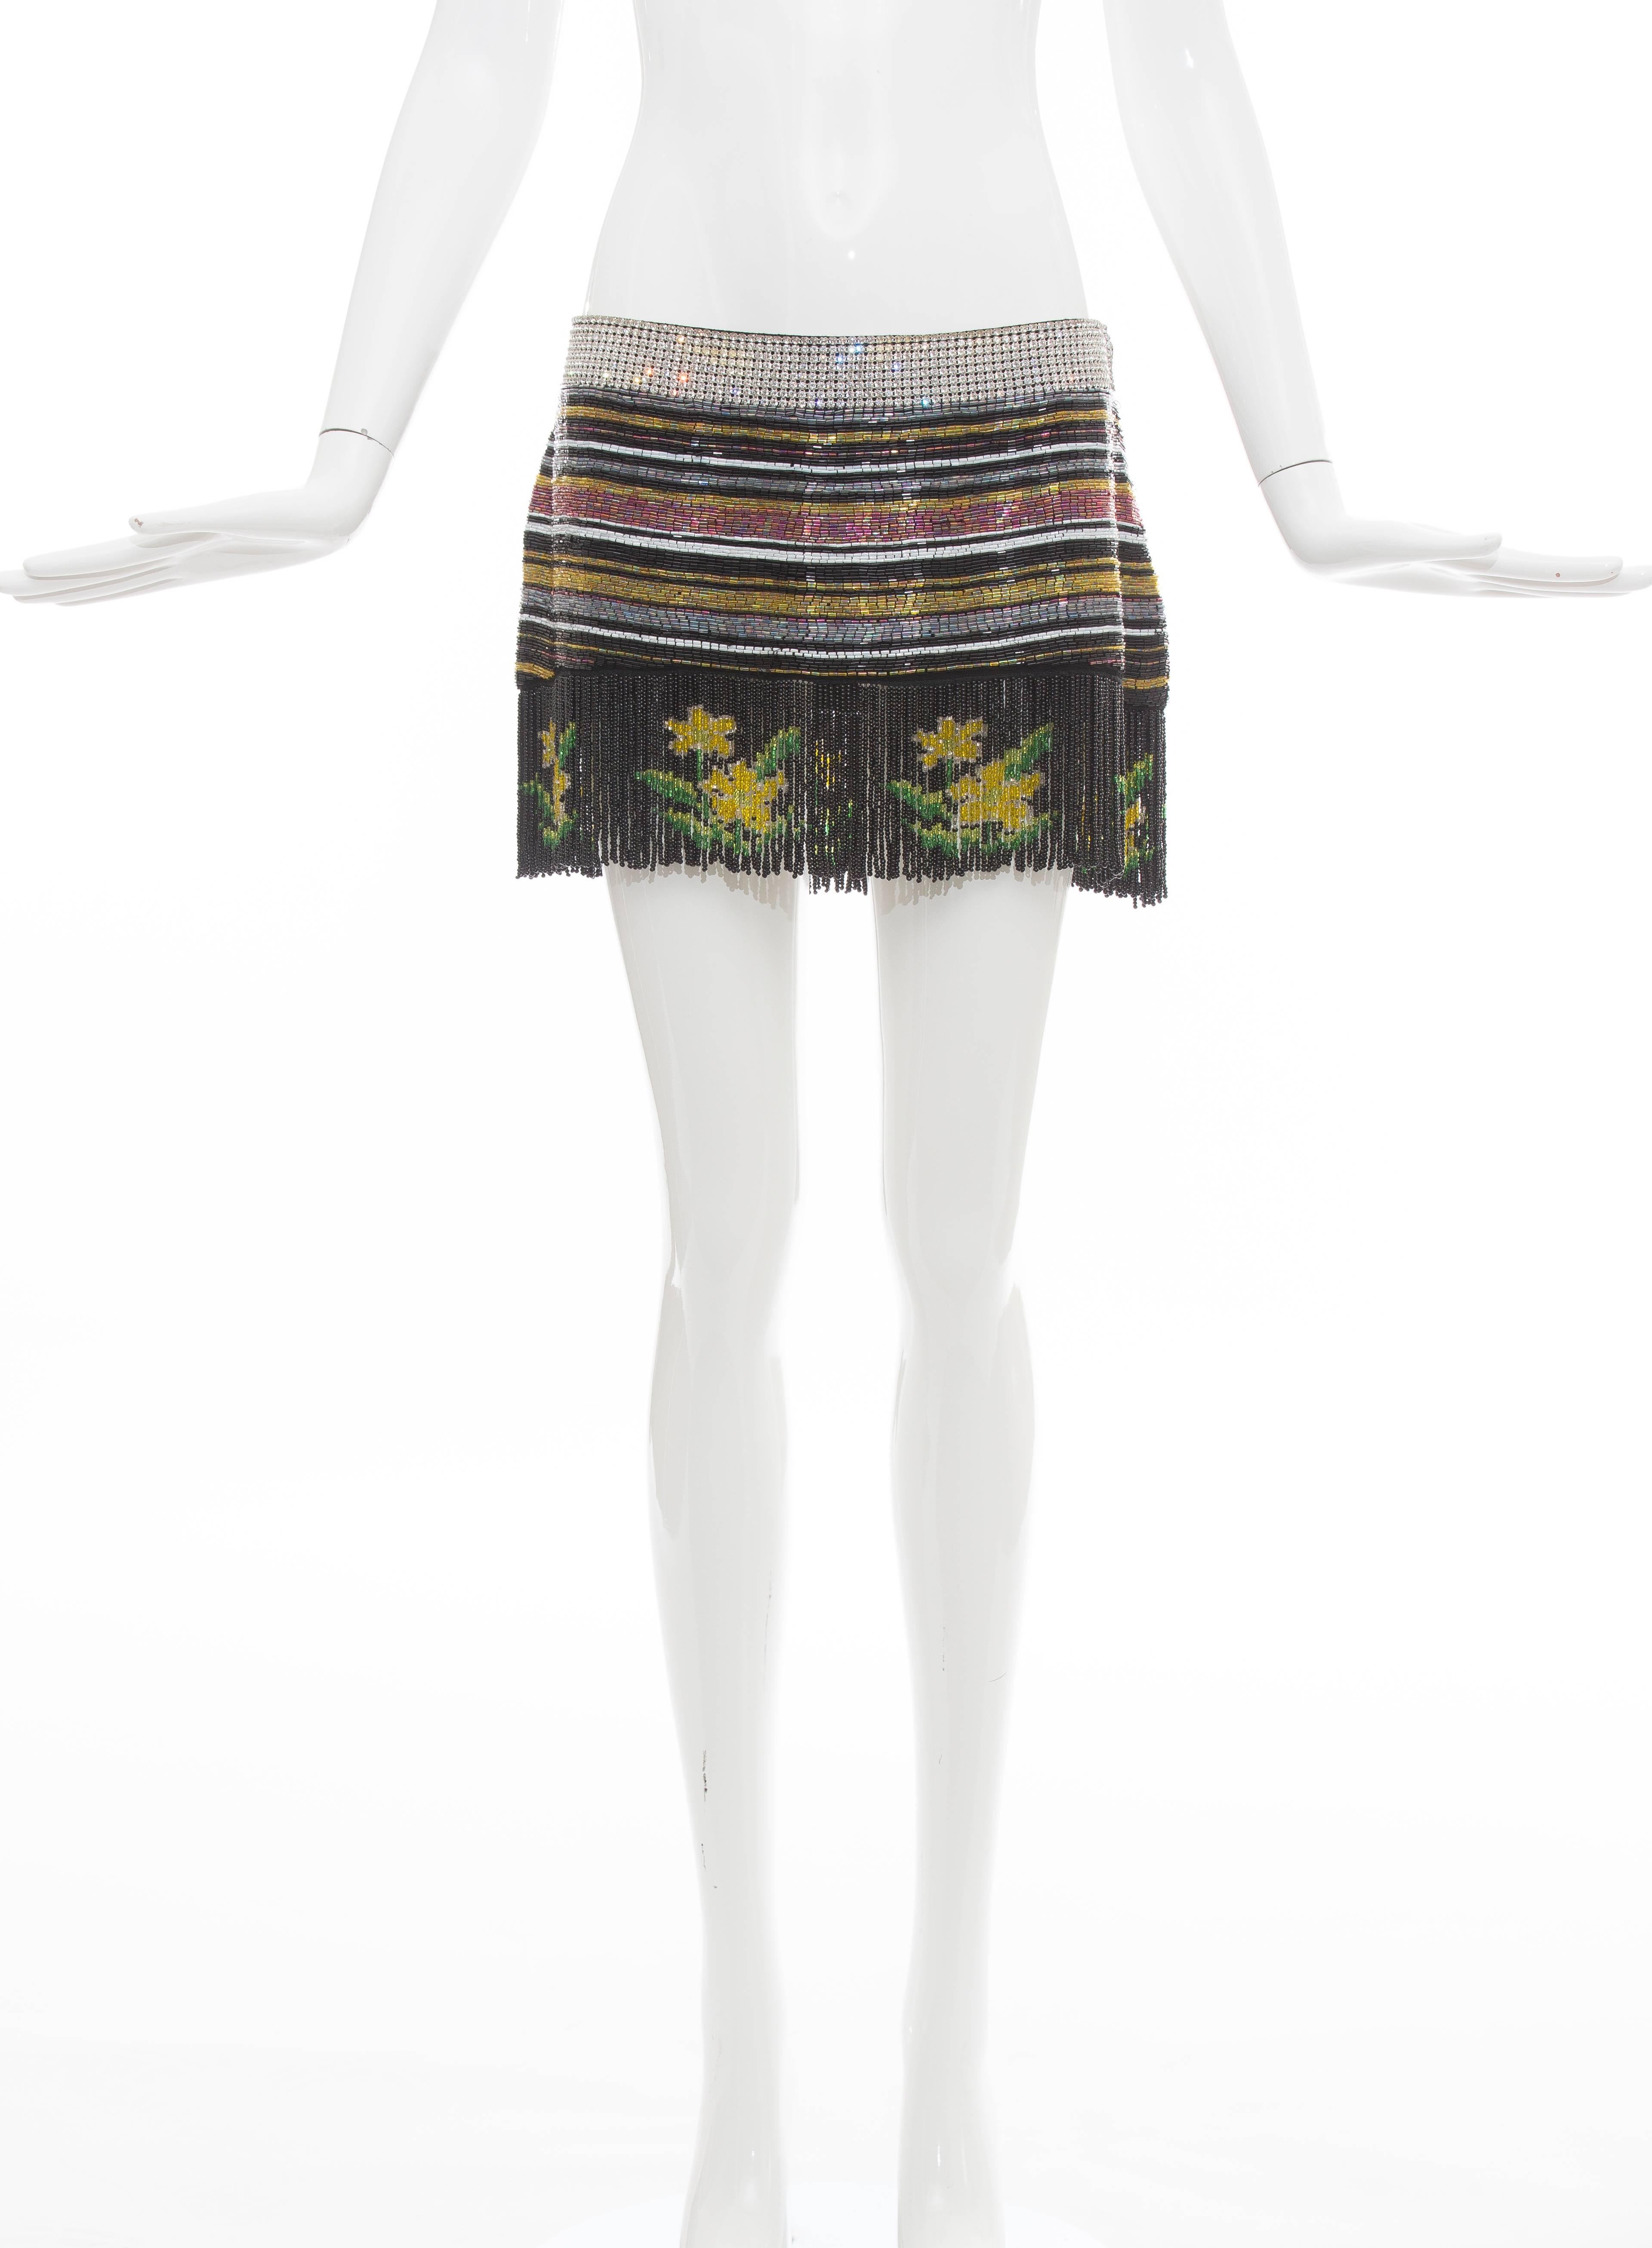 Dolce Gabbana, Spring-Summer 2000 silk mini skirt with beaded embellishments throughout, crystal waistband, fringe trim at hem and zip closure at side.

IT. 42
US. 6
Waist: 32, Hip 37, Length 12.5
